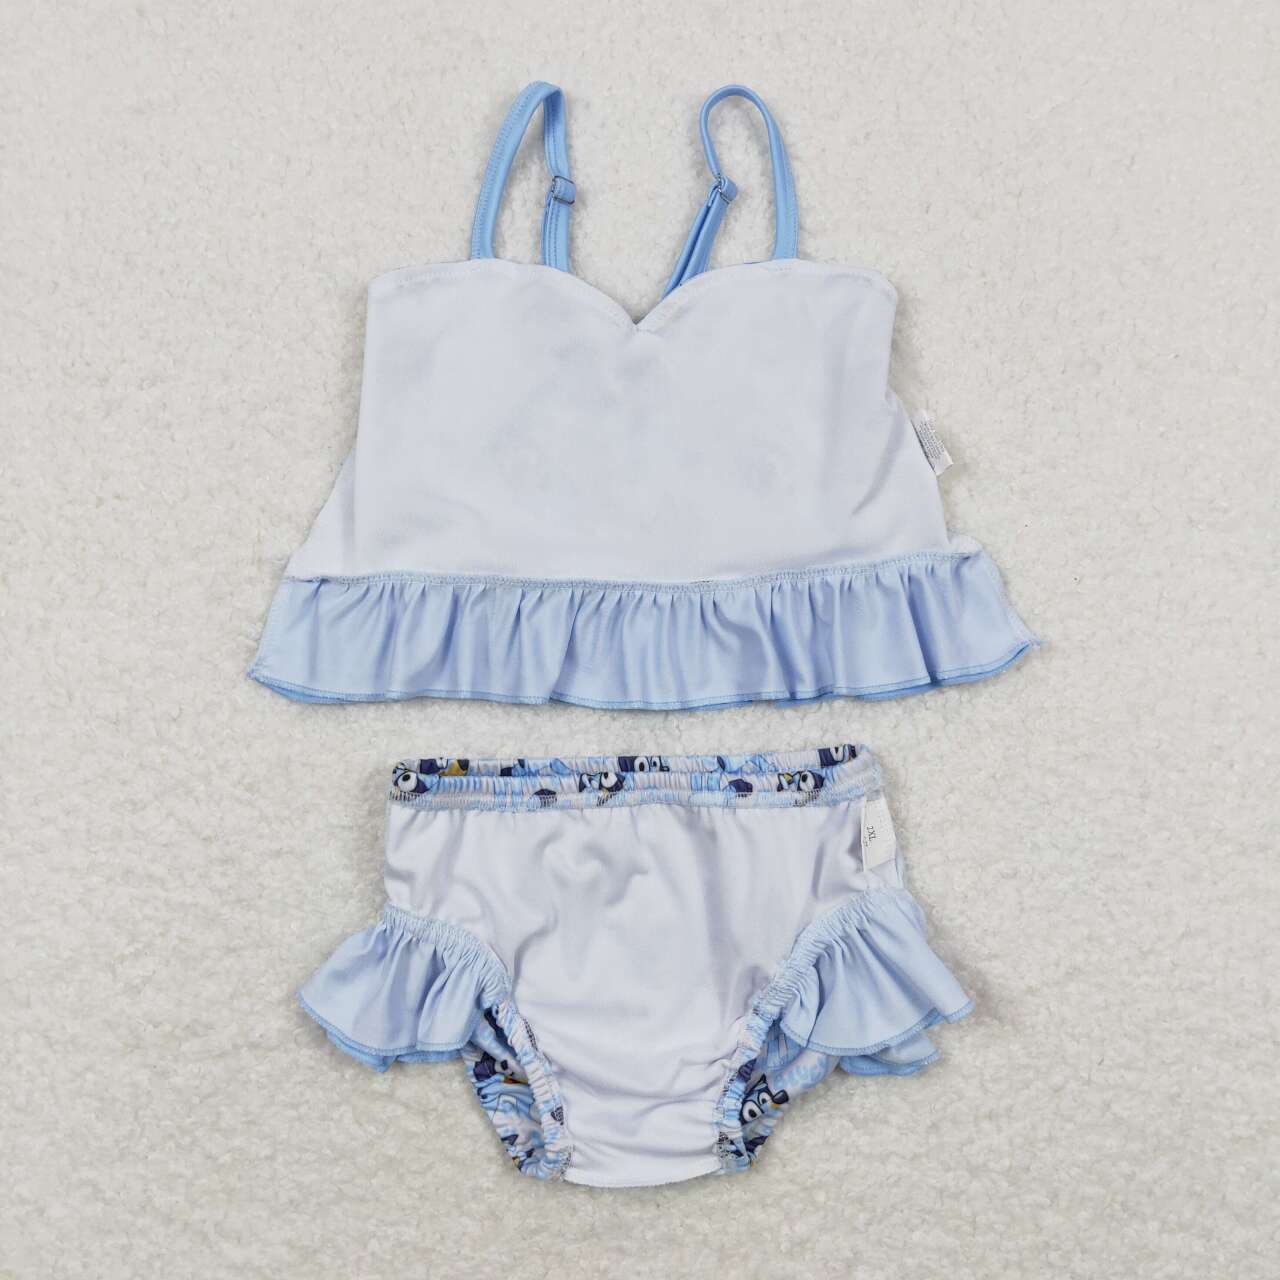 bluey girl two piece swimsuit